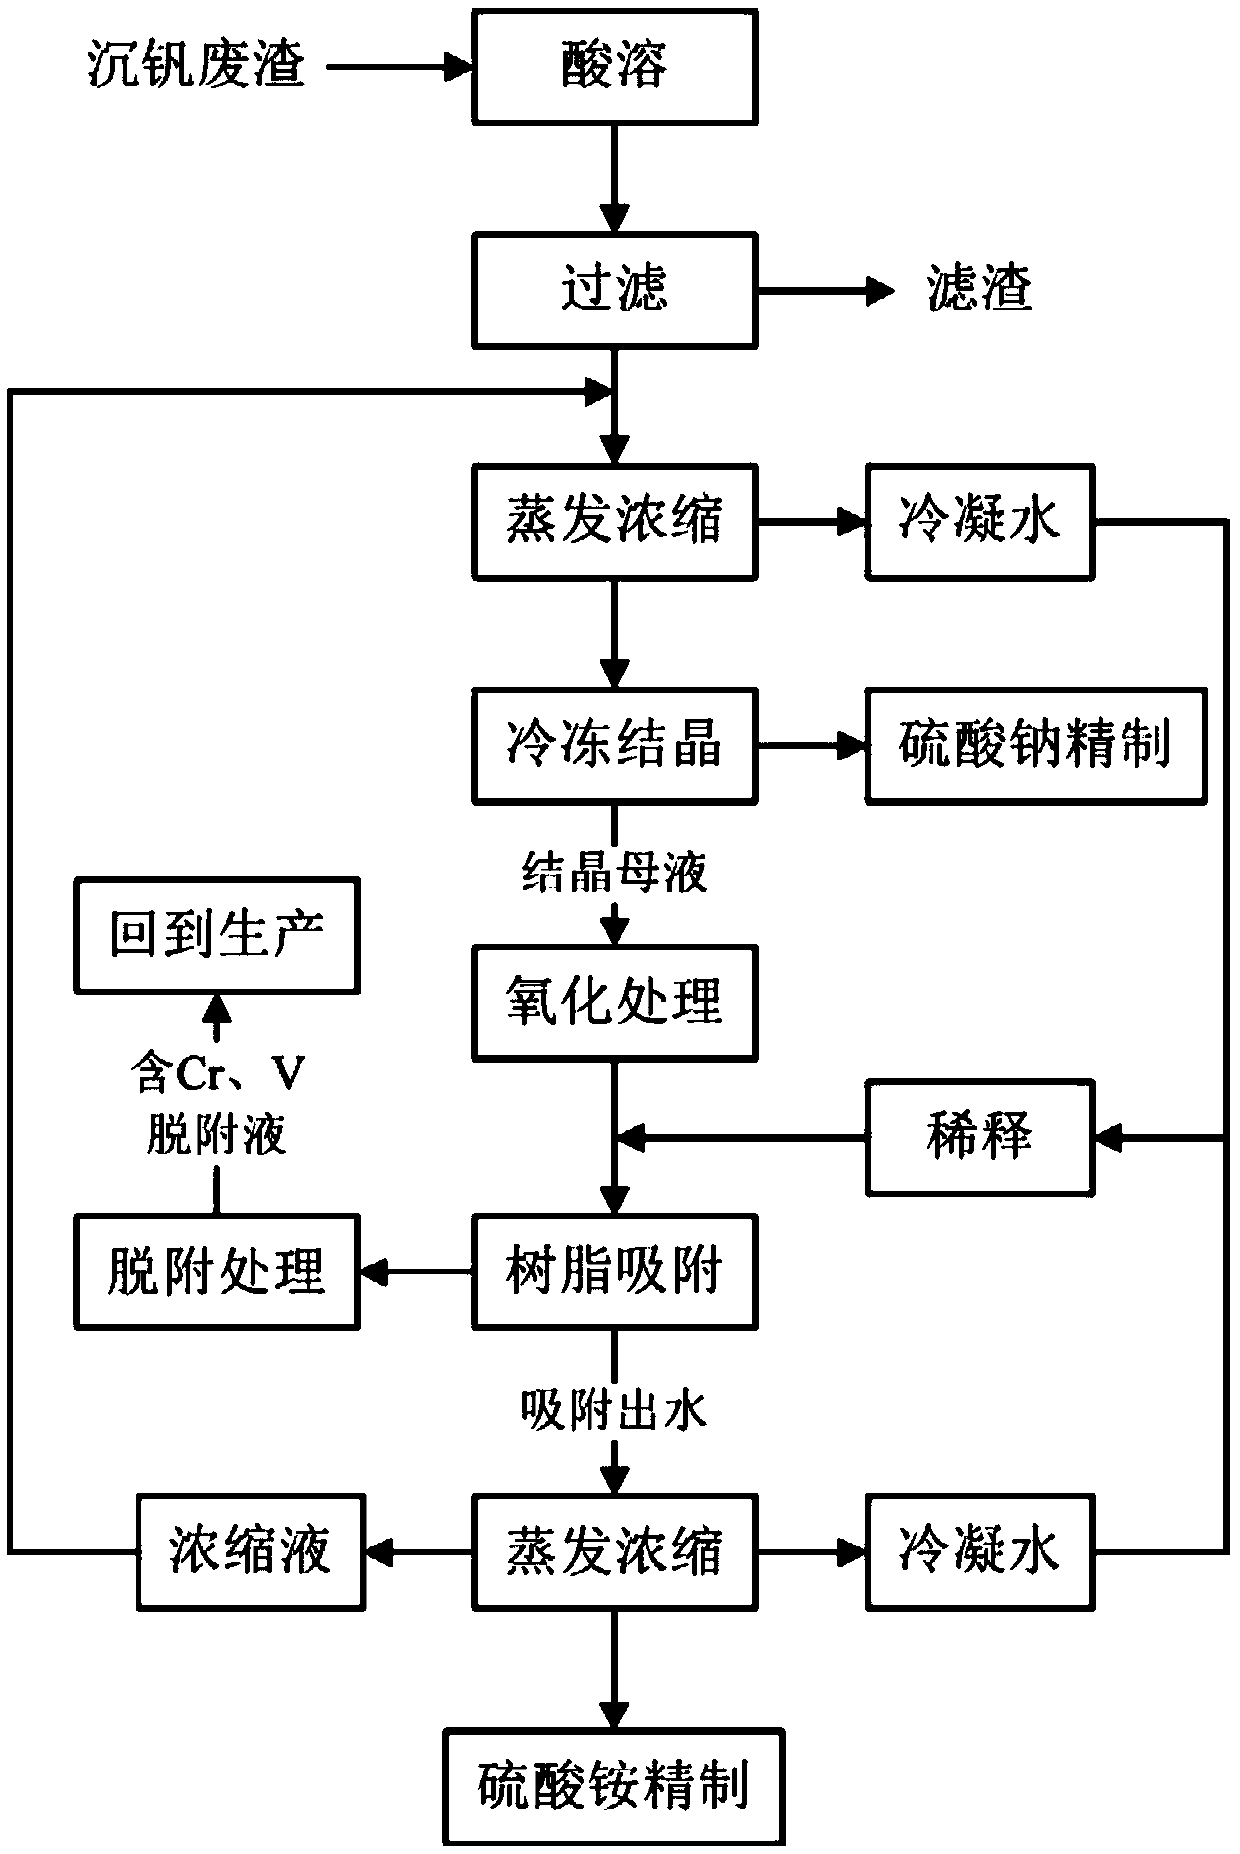 Method for processing high salinity wastewater containing chromium and vanadium and method for processing precipitated vanadium slag